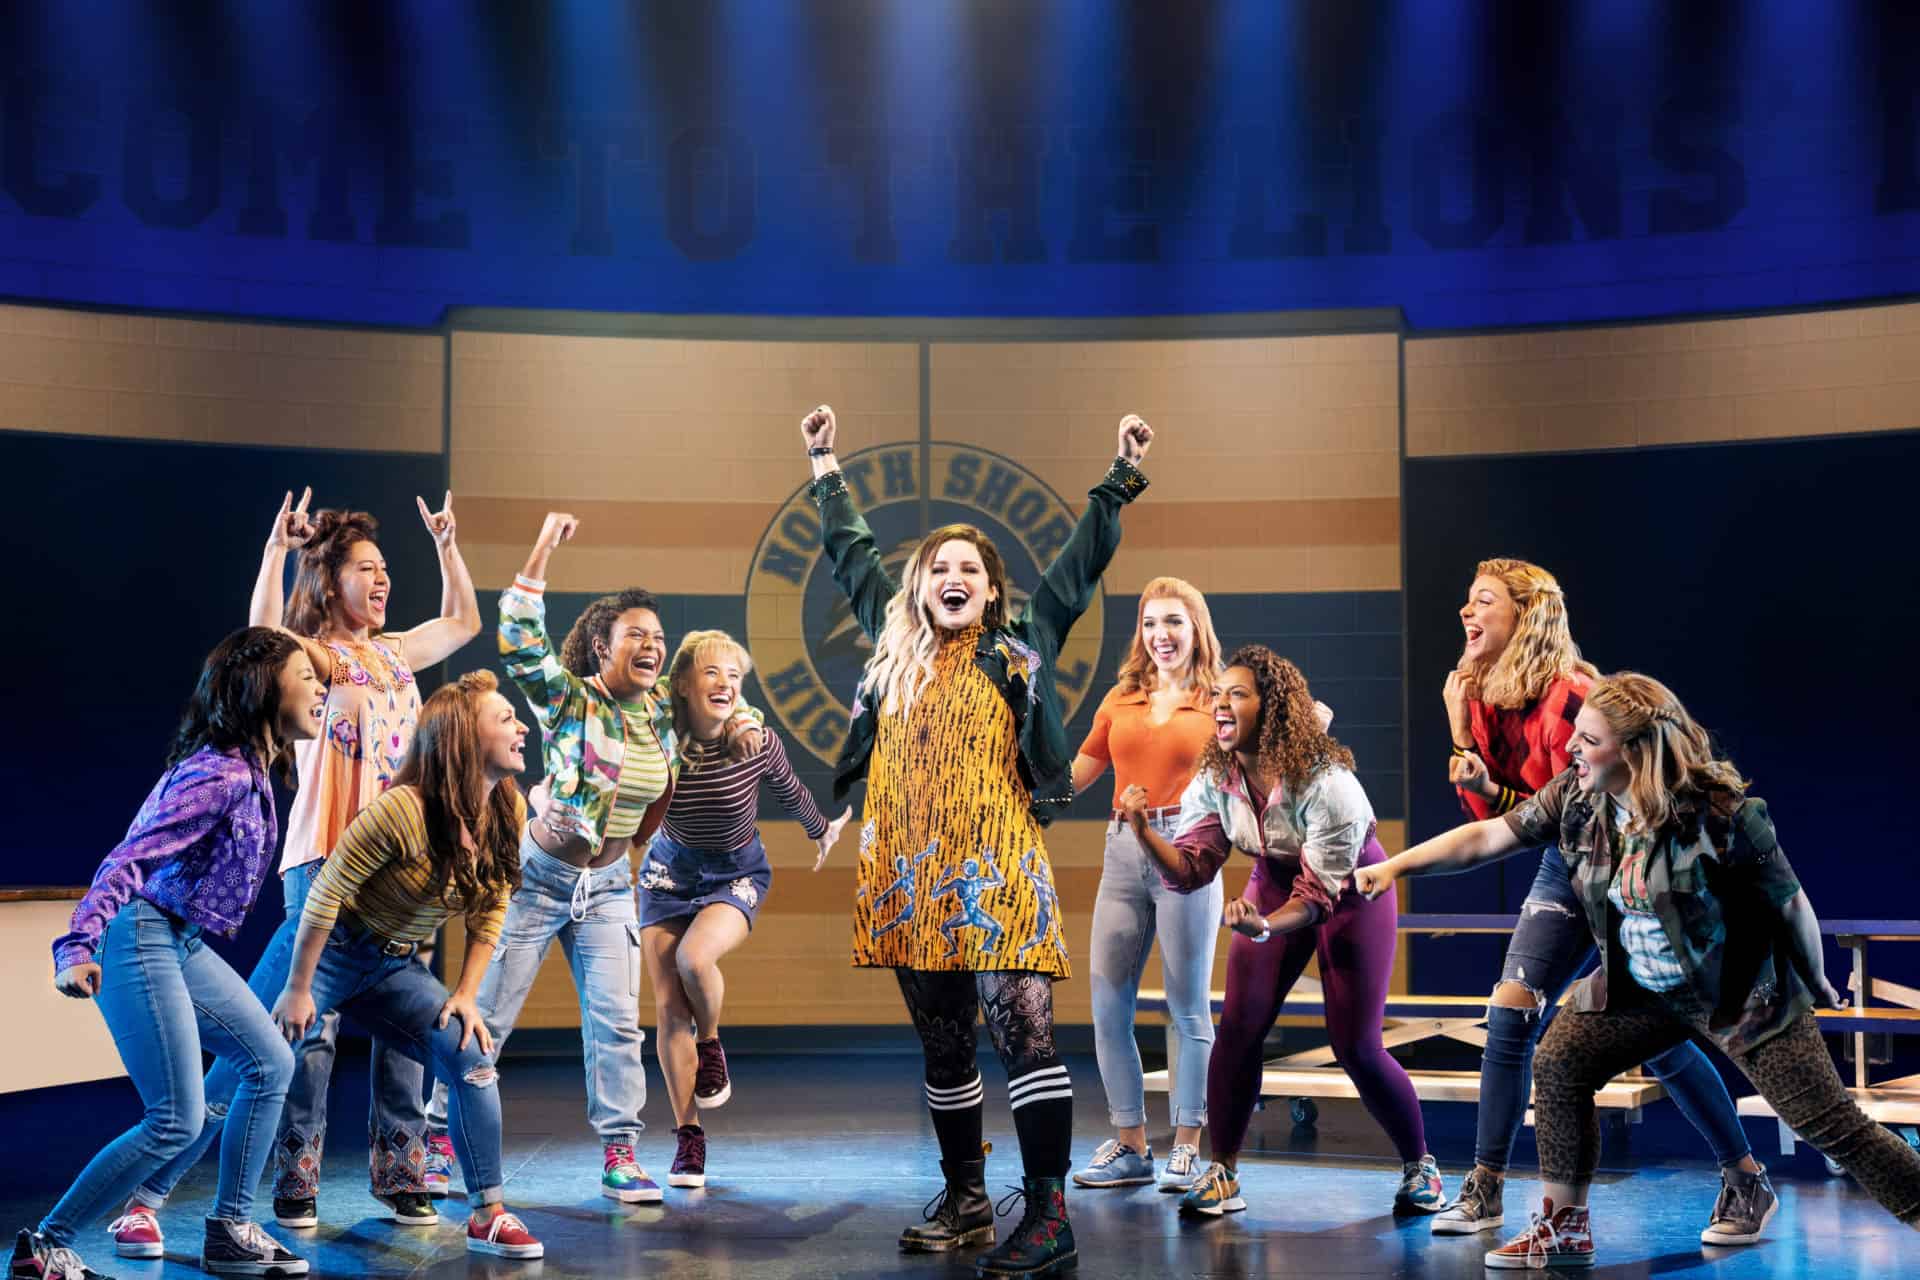 Lindsay Heather Pearce stands on stage as Janis in Mean Girls. The set is a high school and students stand around her.